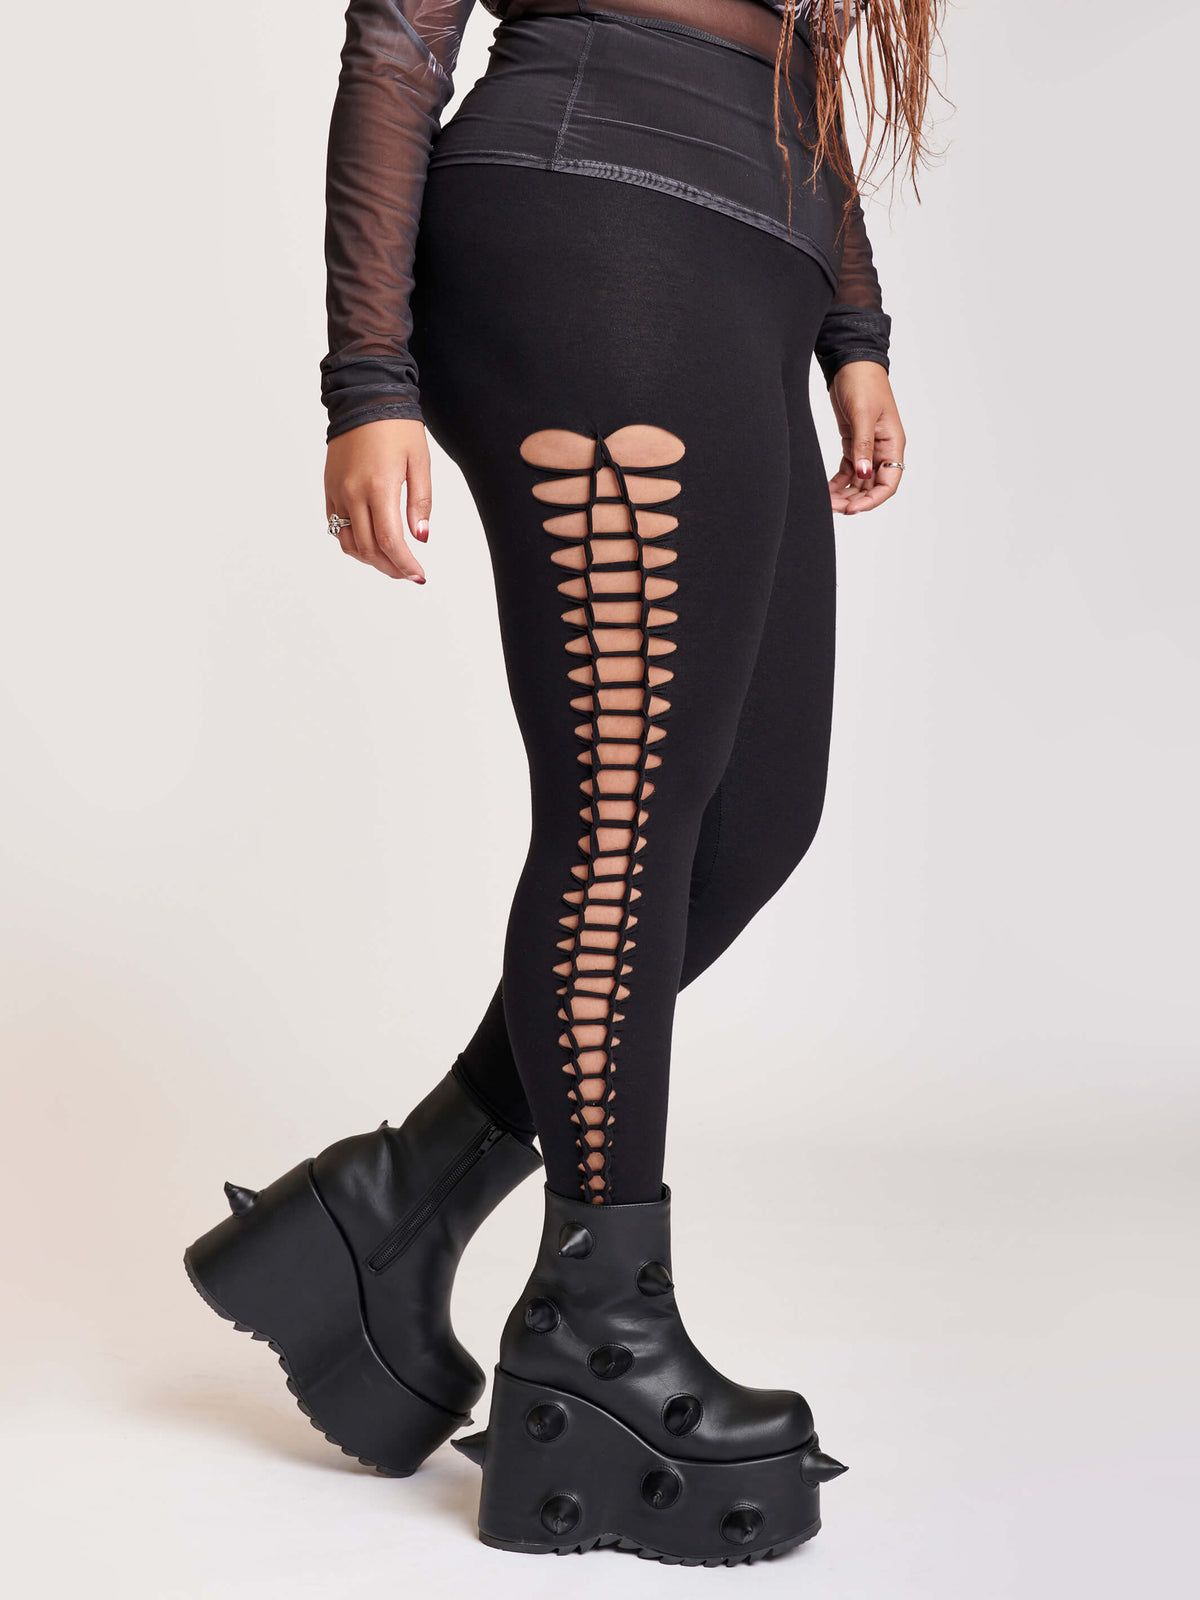 Stretchy cotton spandex leggings with slashed and braided side details.